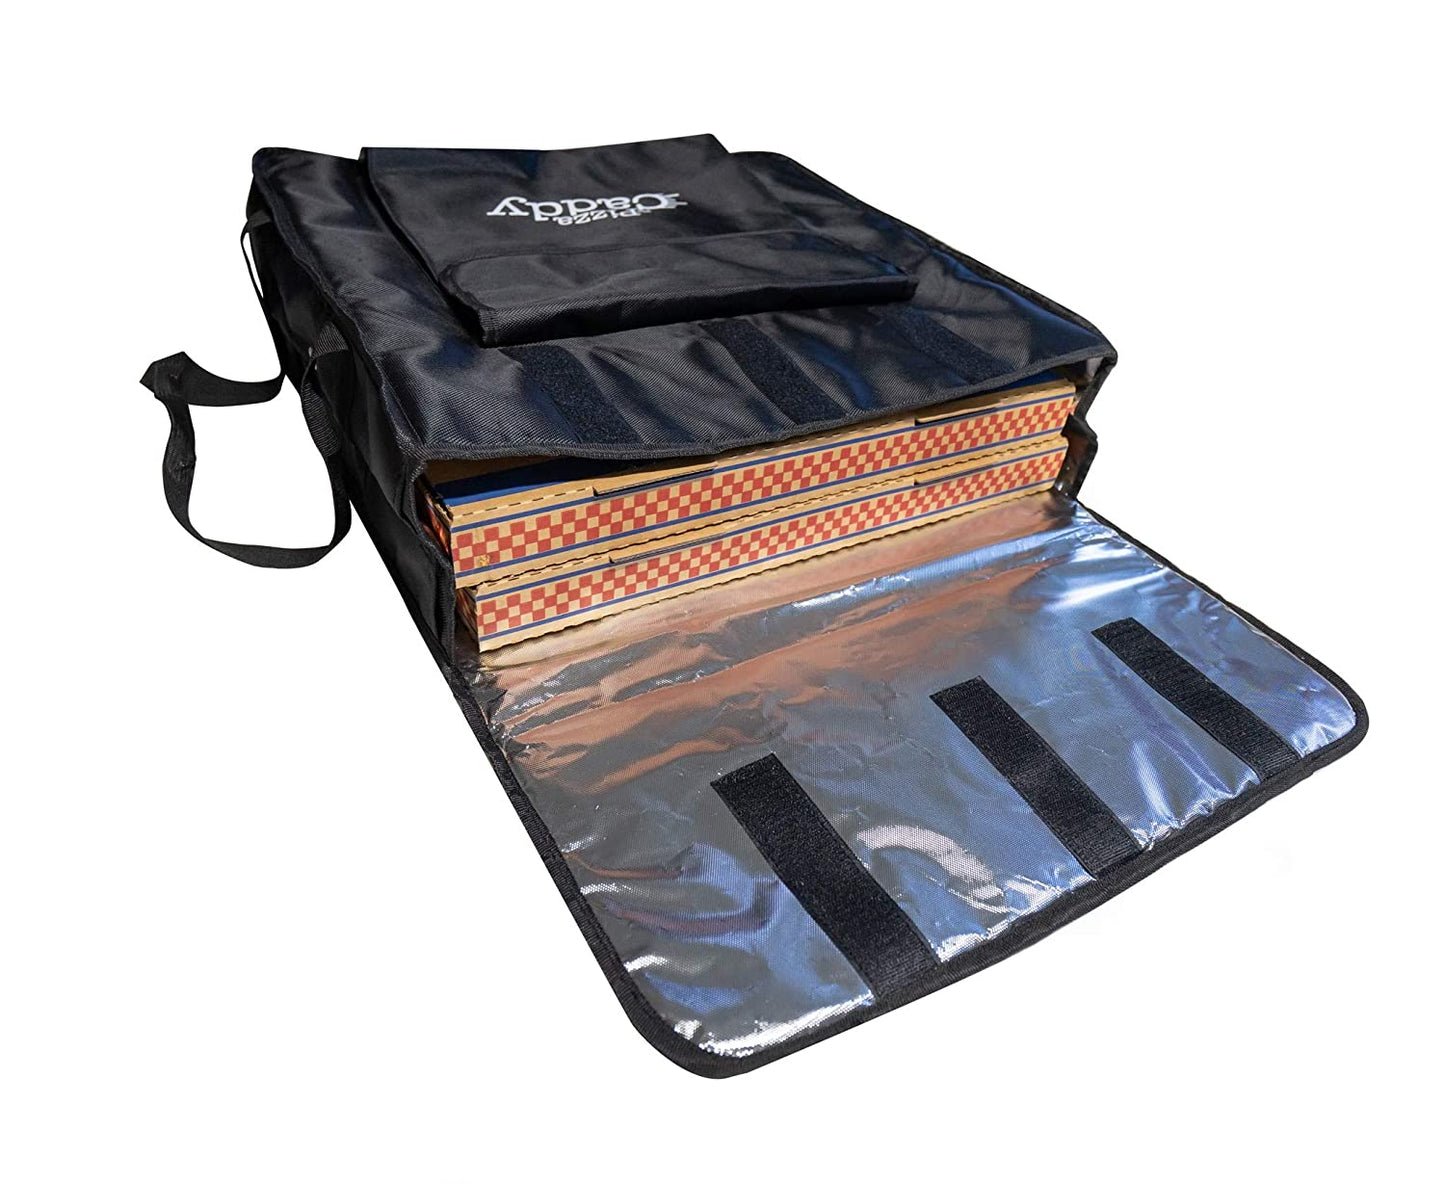 Caddy Mesa - Insulated Pizza Carrier For Takeout and Delivery